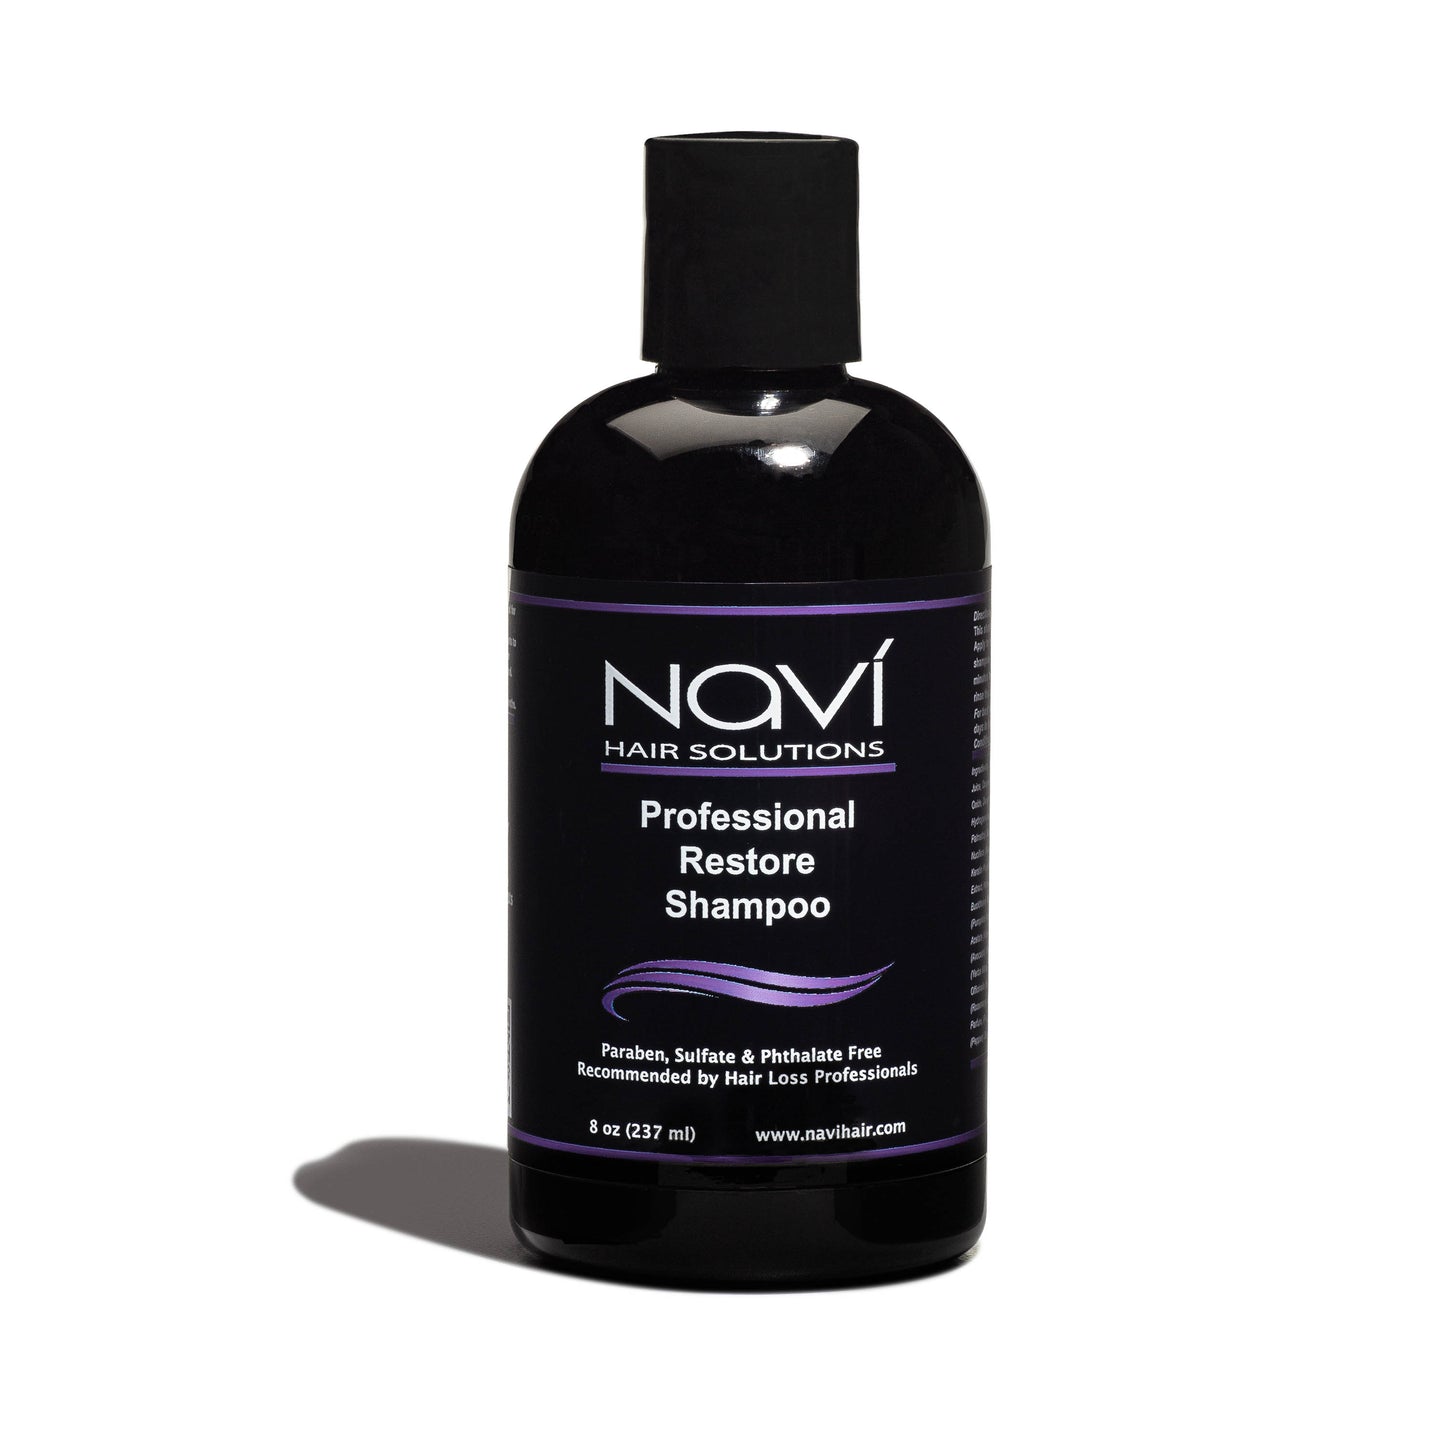 Navi Professional restore conditioner with DHT Blocking Ingredients known to hep regrow thicker fuller healthier hair